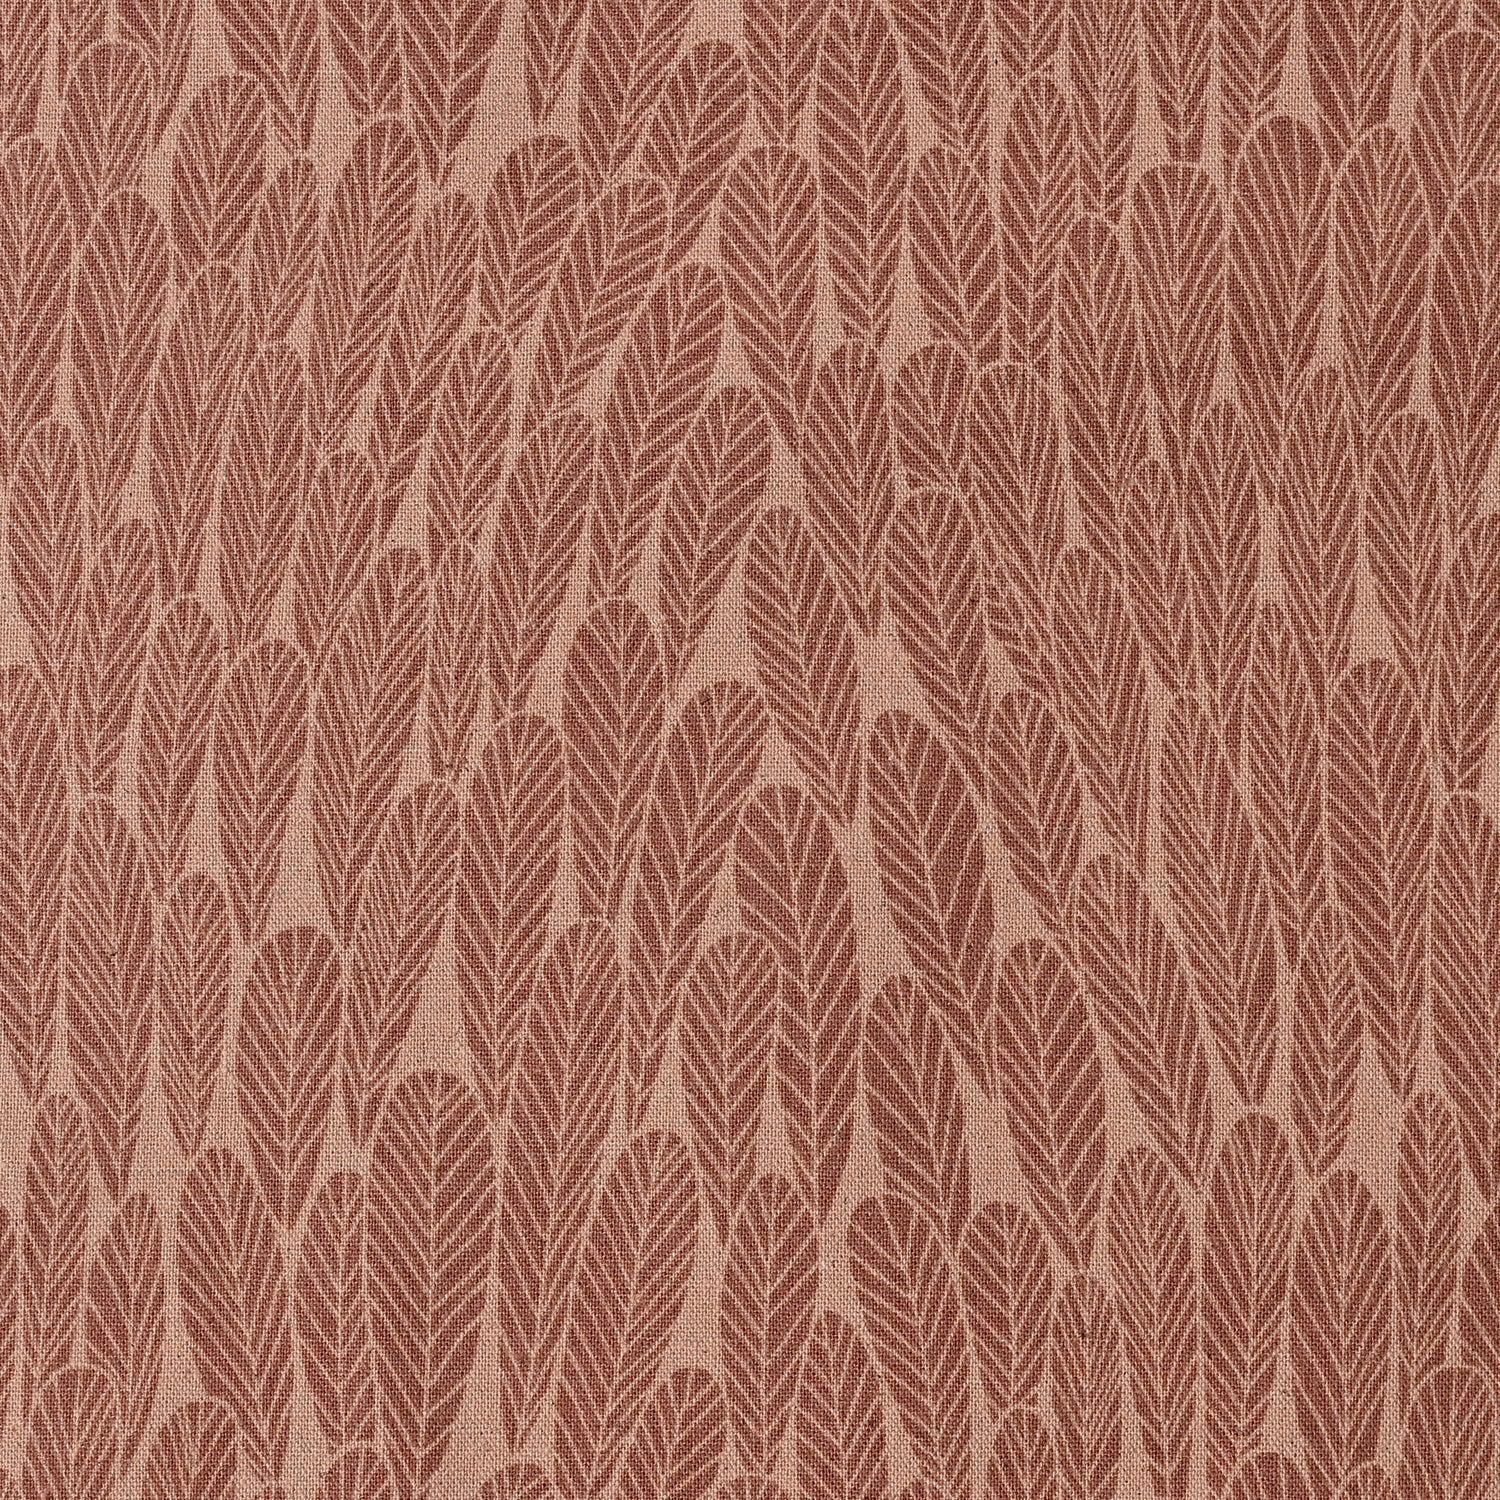 Kokka-Bloom By Bookhou Leaf - Rust, on Cotton/Linen Canvas-fabric-gather here online